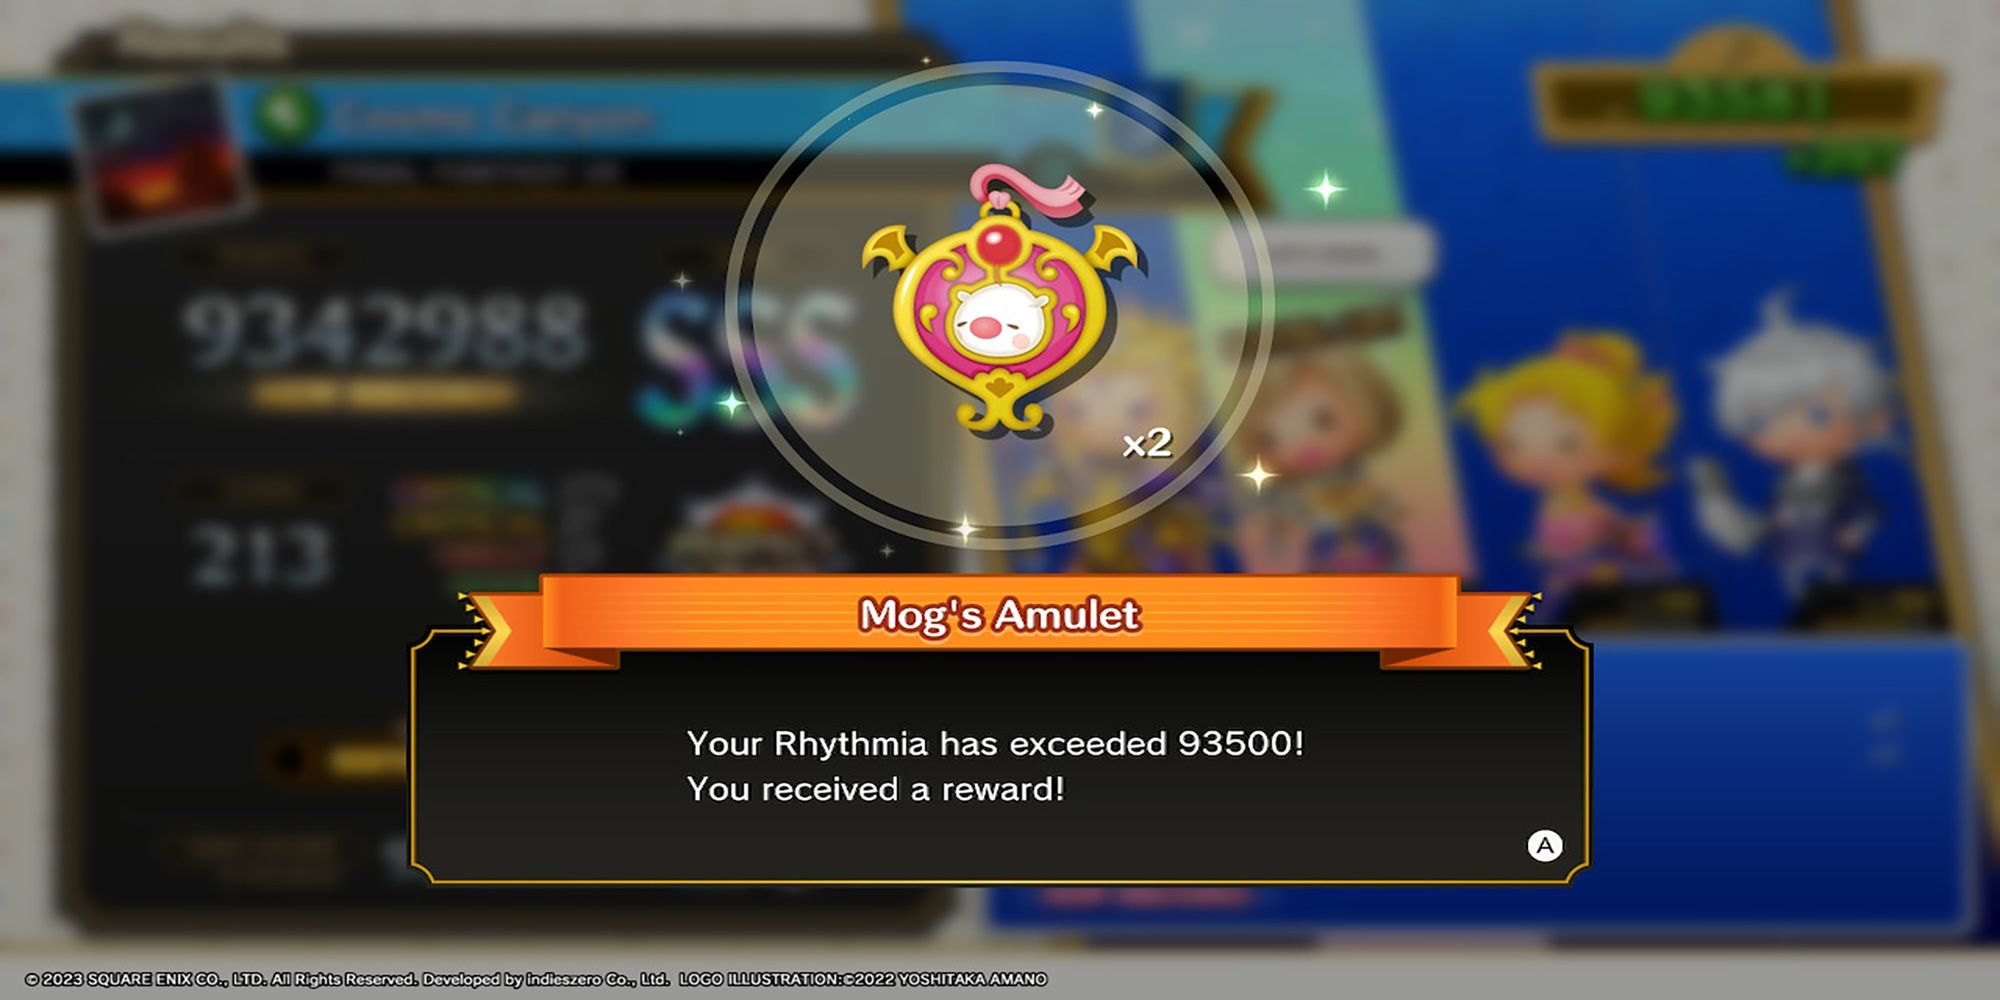 Mog's Amulet, a pink locket with a moogle's face on it, from Theatrhythm Final Bar Line.